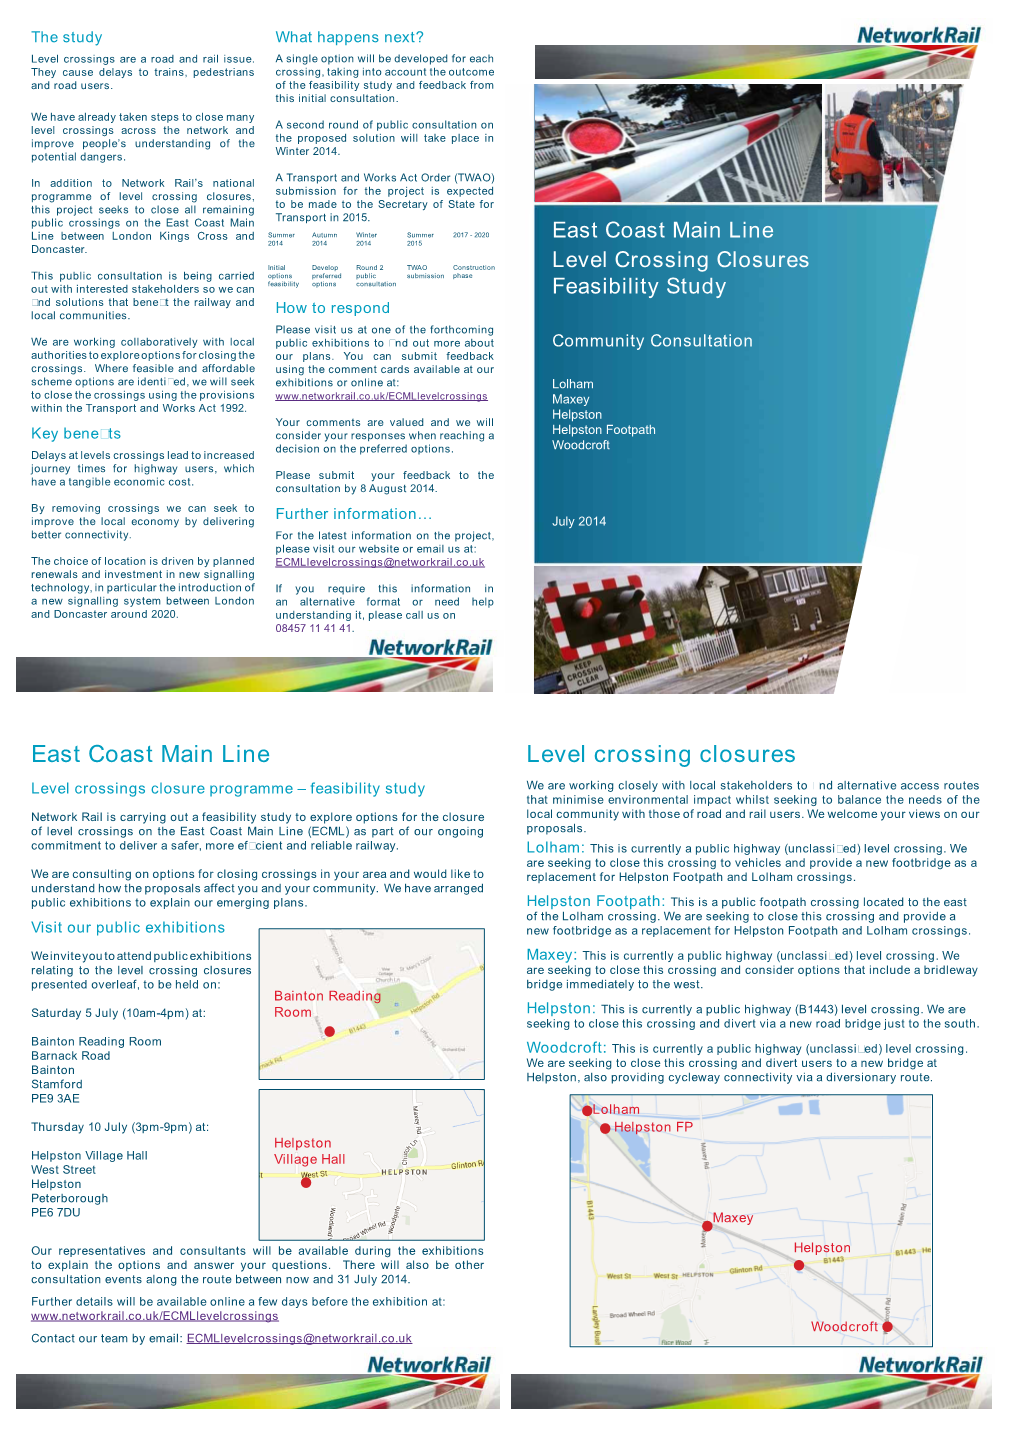 Leaflet on Proposed Level Crossing Changes